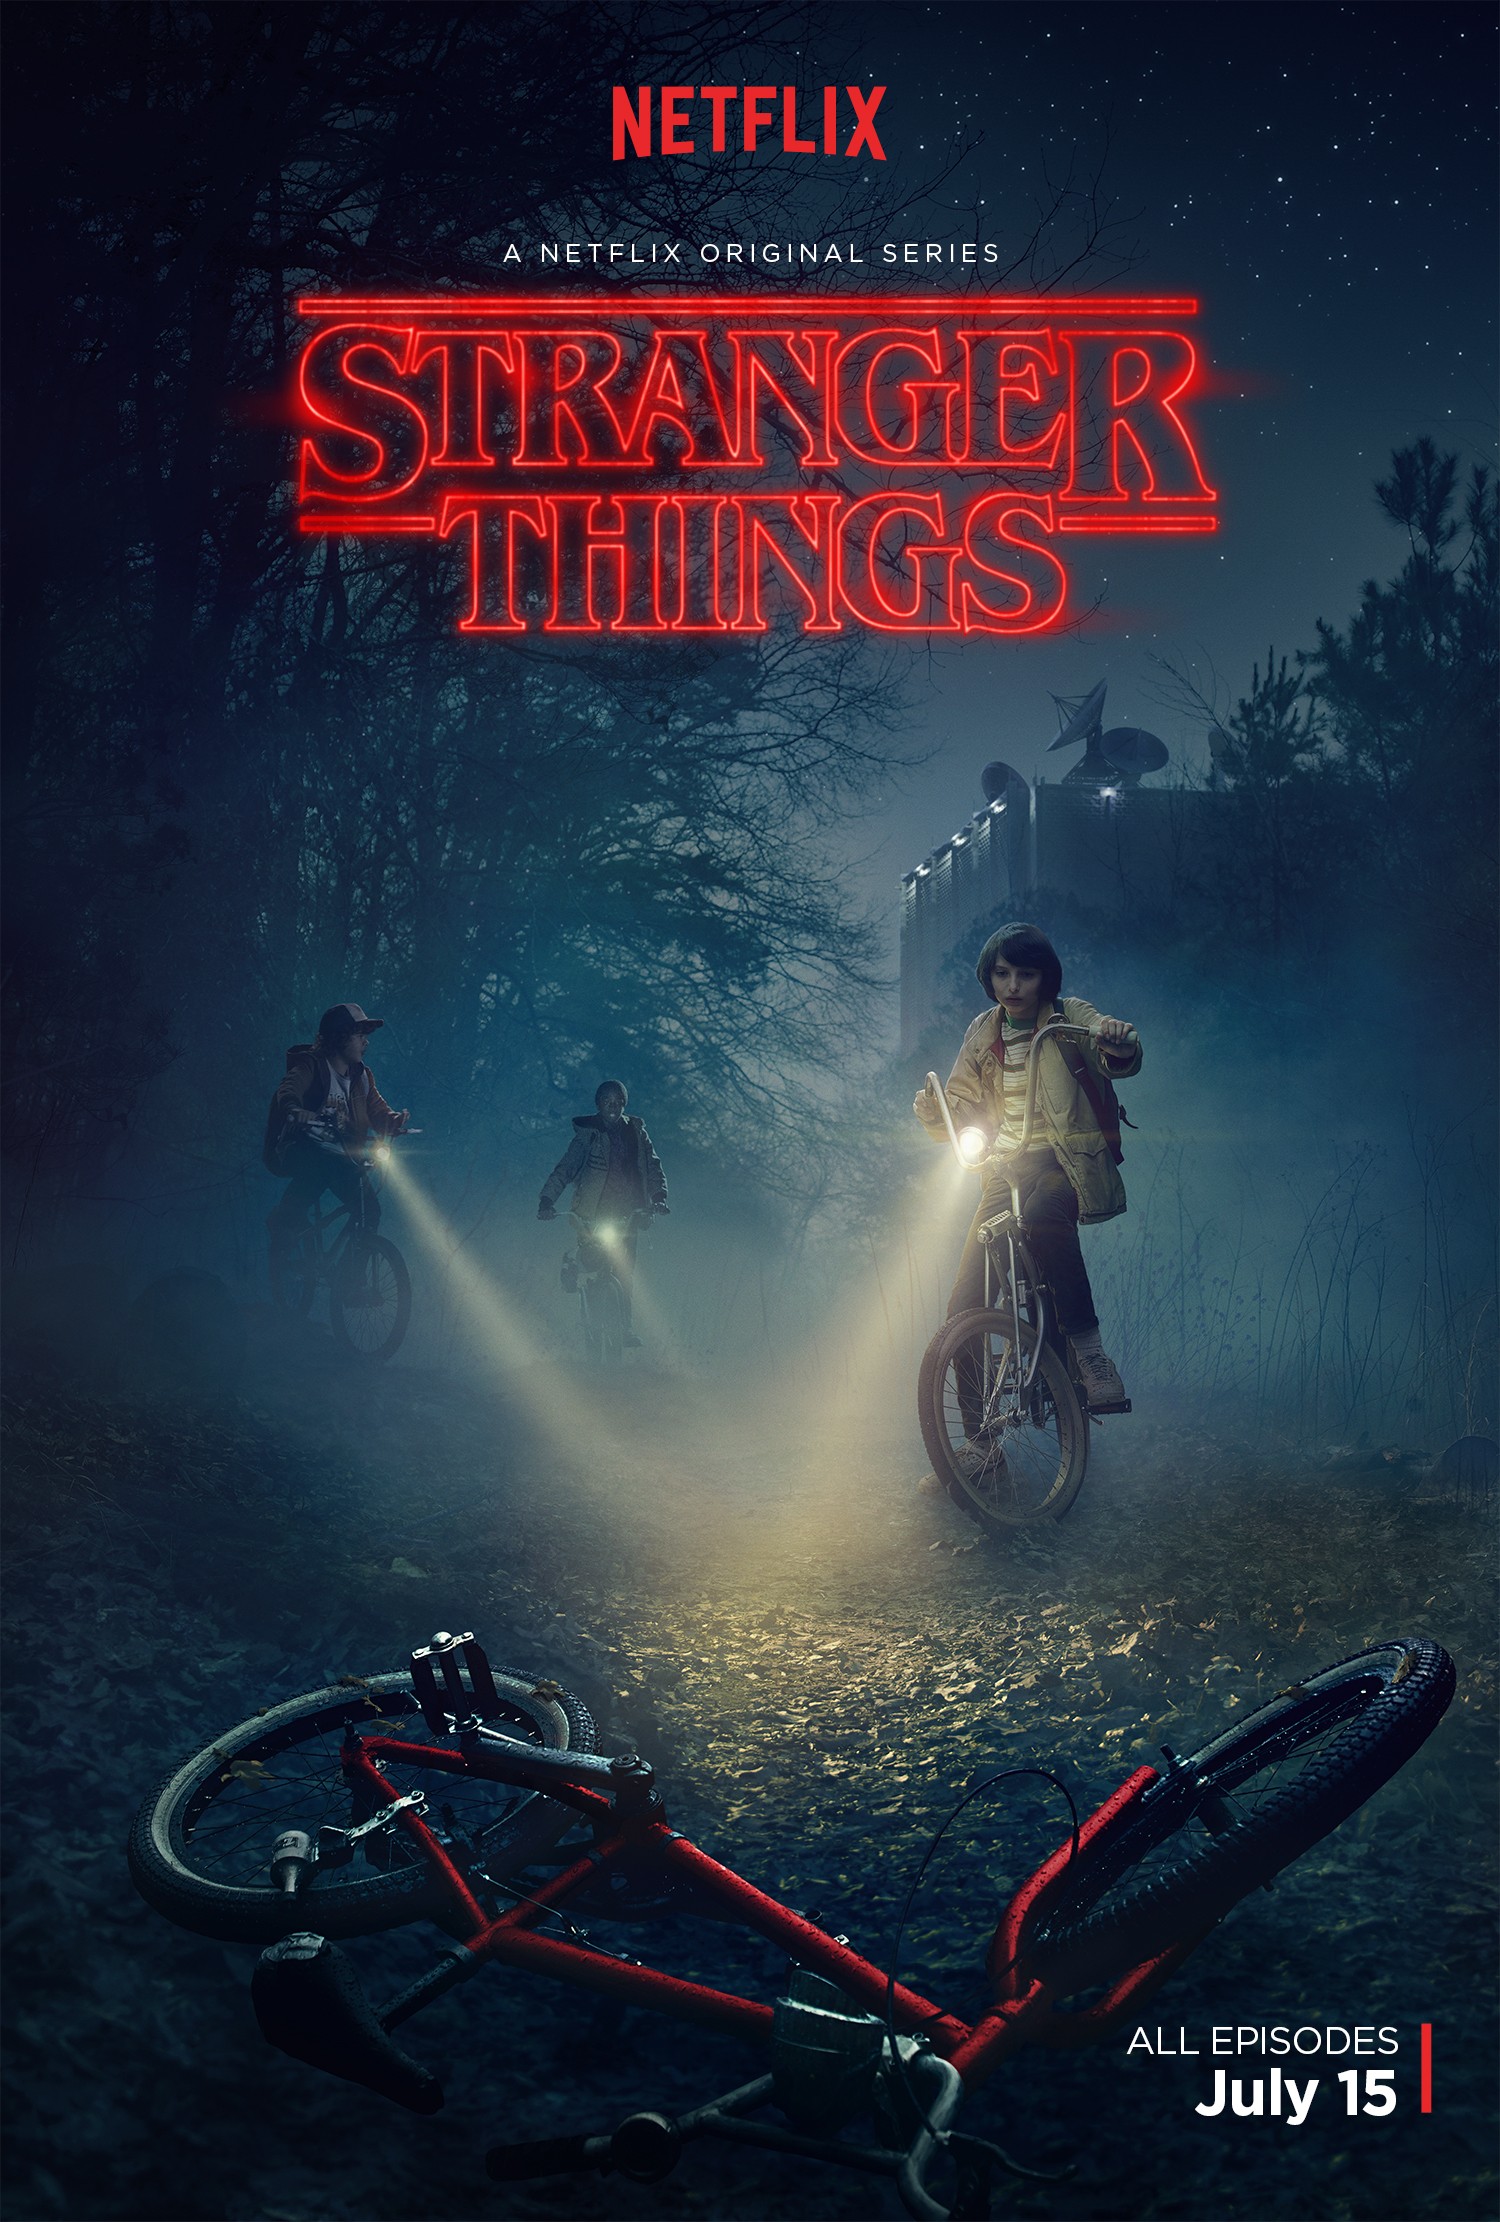 A Certain Type - Chapter 1 - ann_anotherthing - Stranger Things (TV 2016)  [Archive of Our Own]